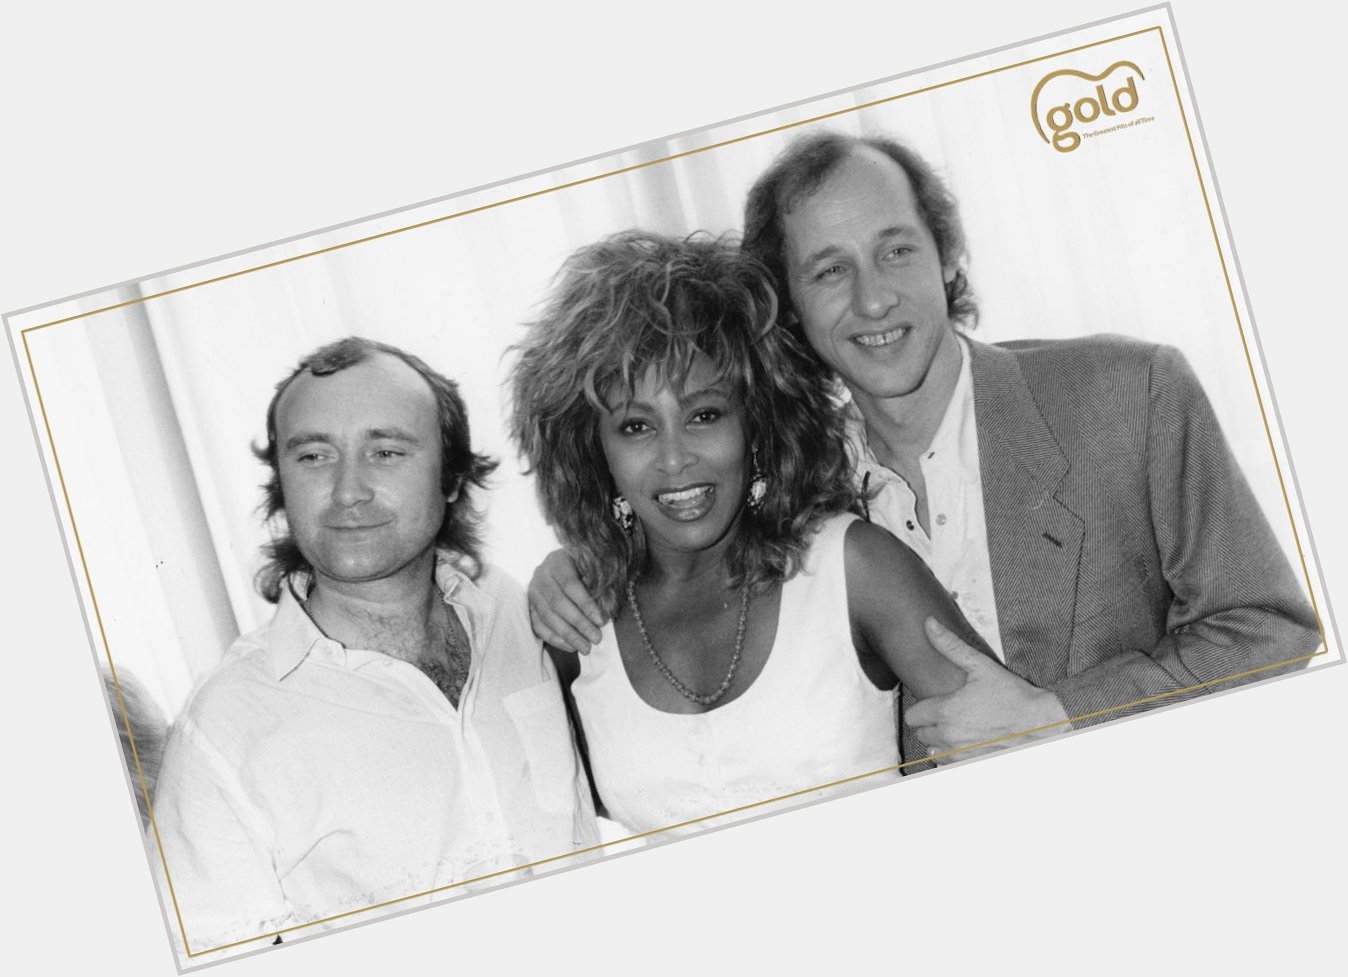 Happy birthday Dire Straits star Mark Knopfler! Here he is with pals Tina and Phil back in the day... 